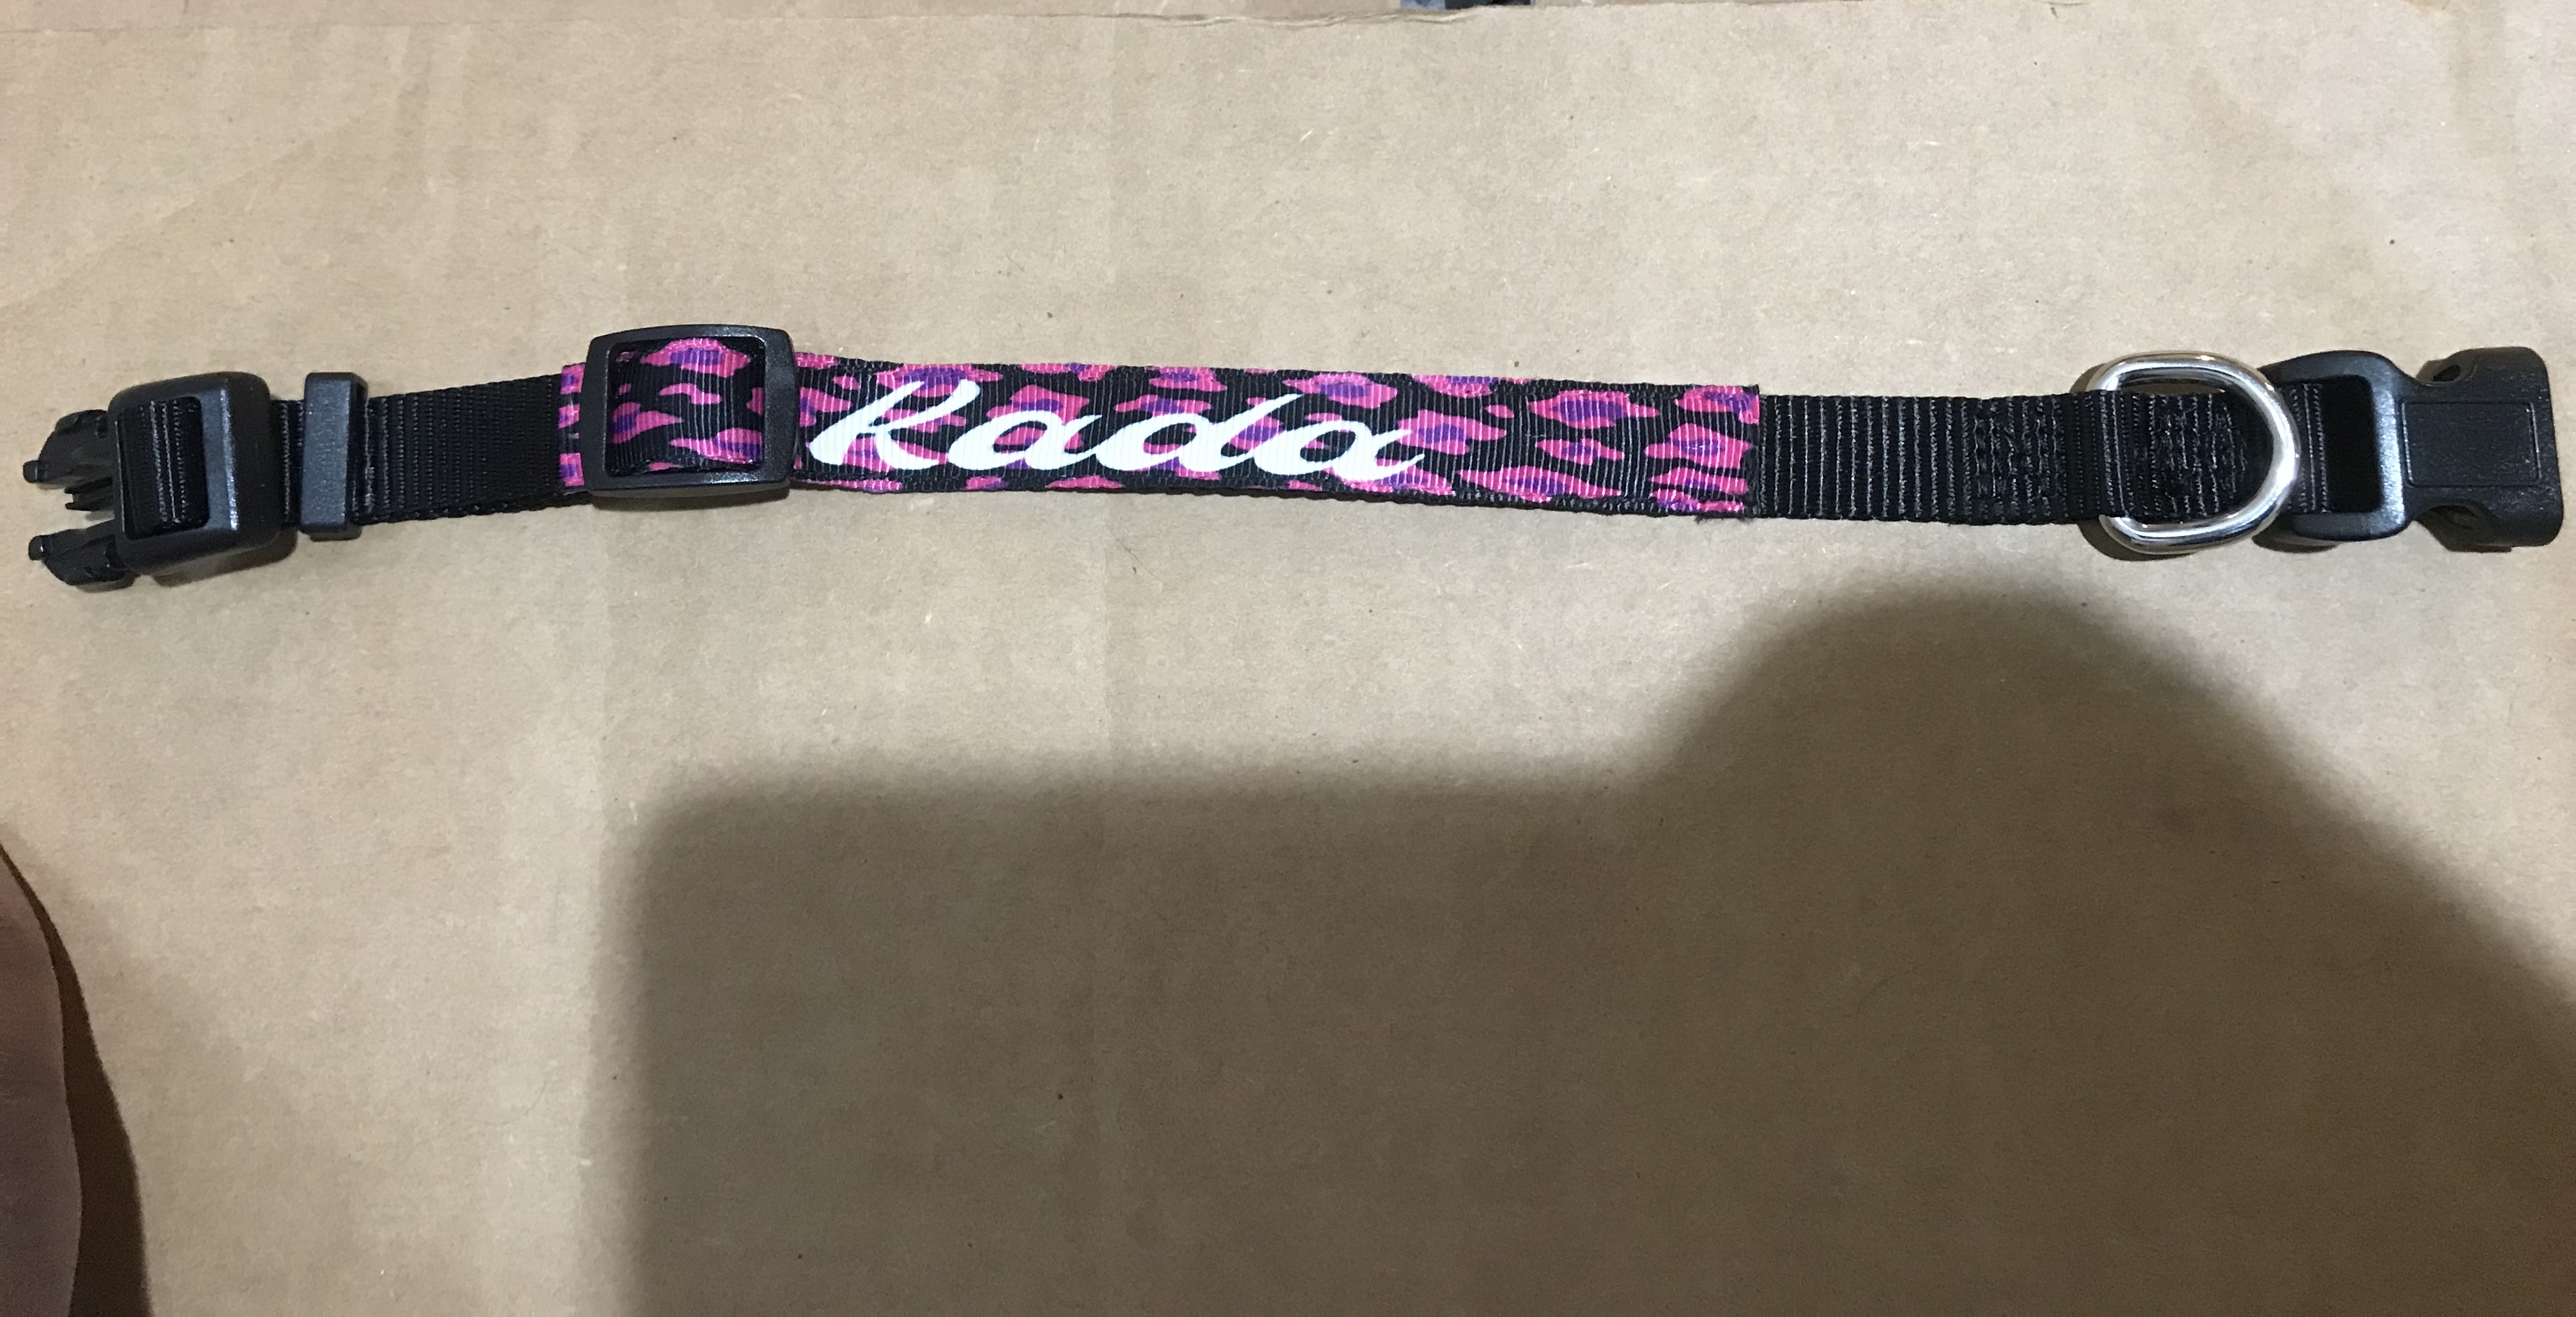 A little Kada made with sublimation printing